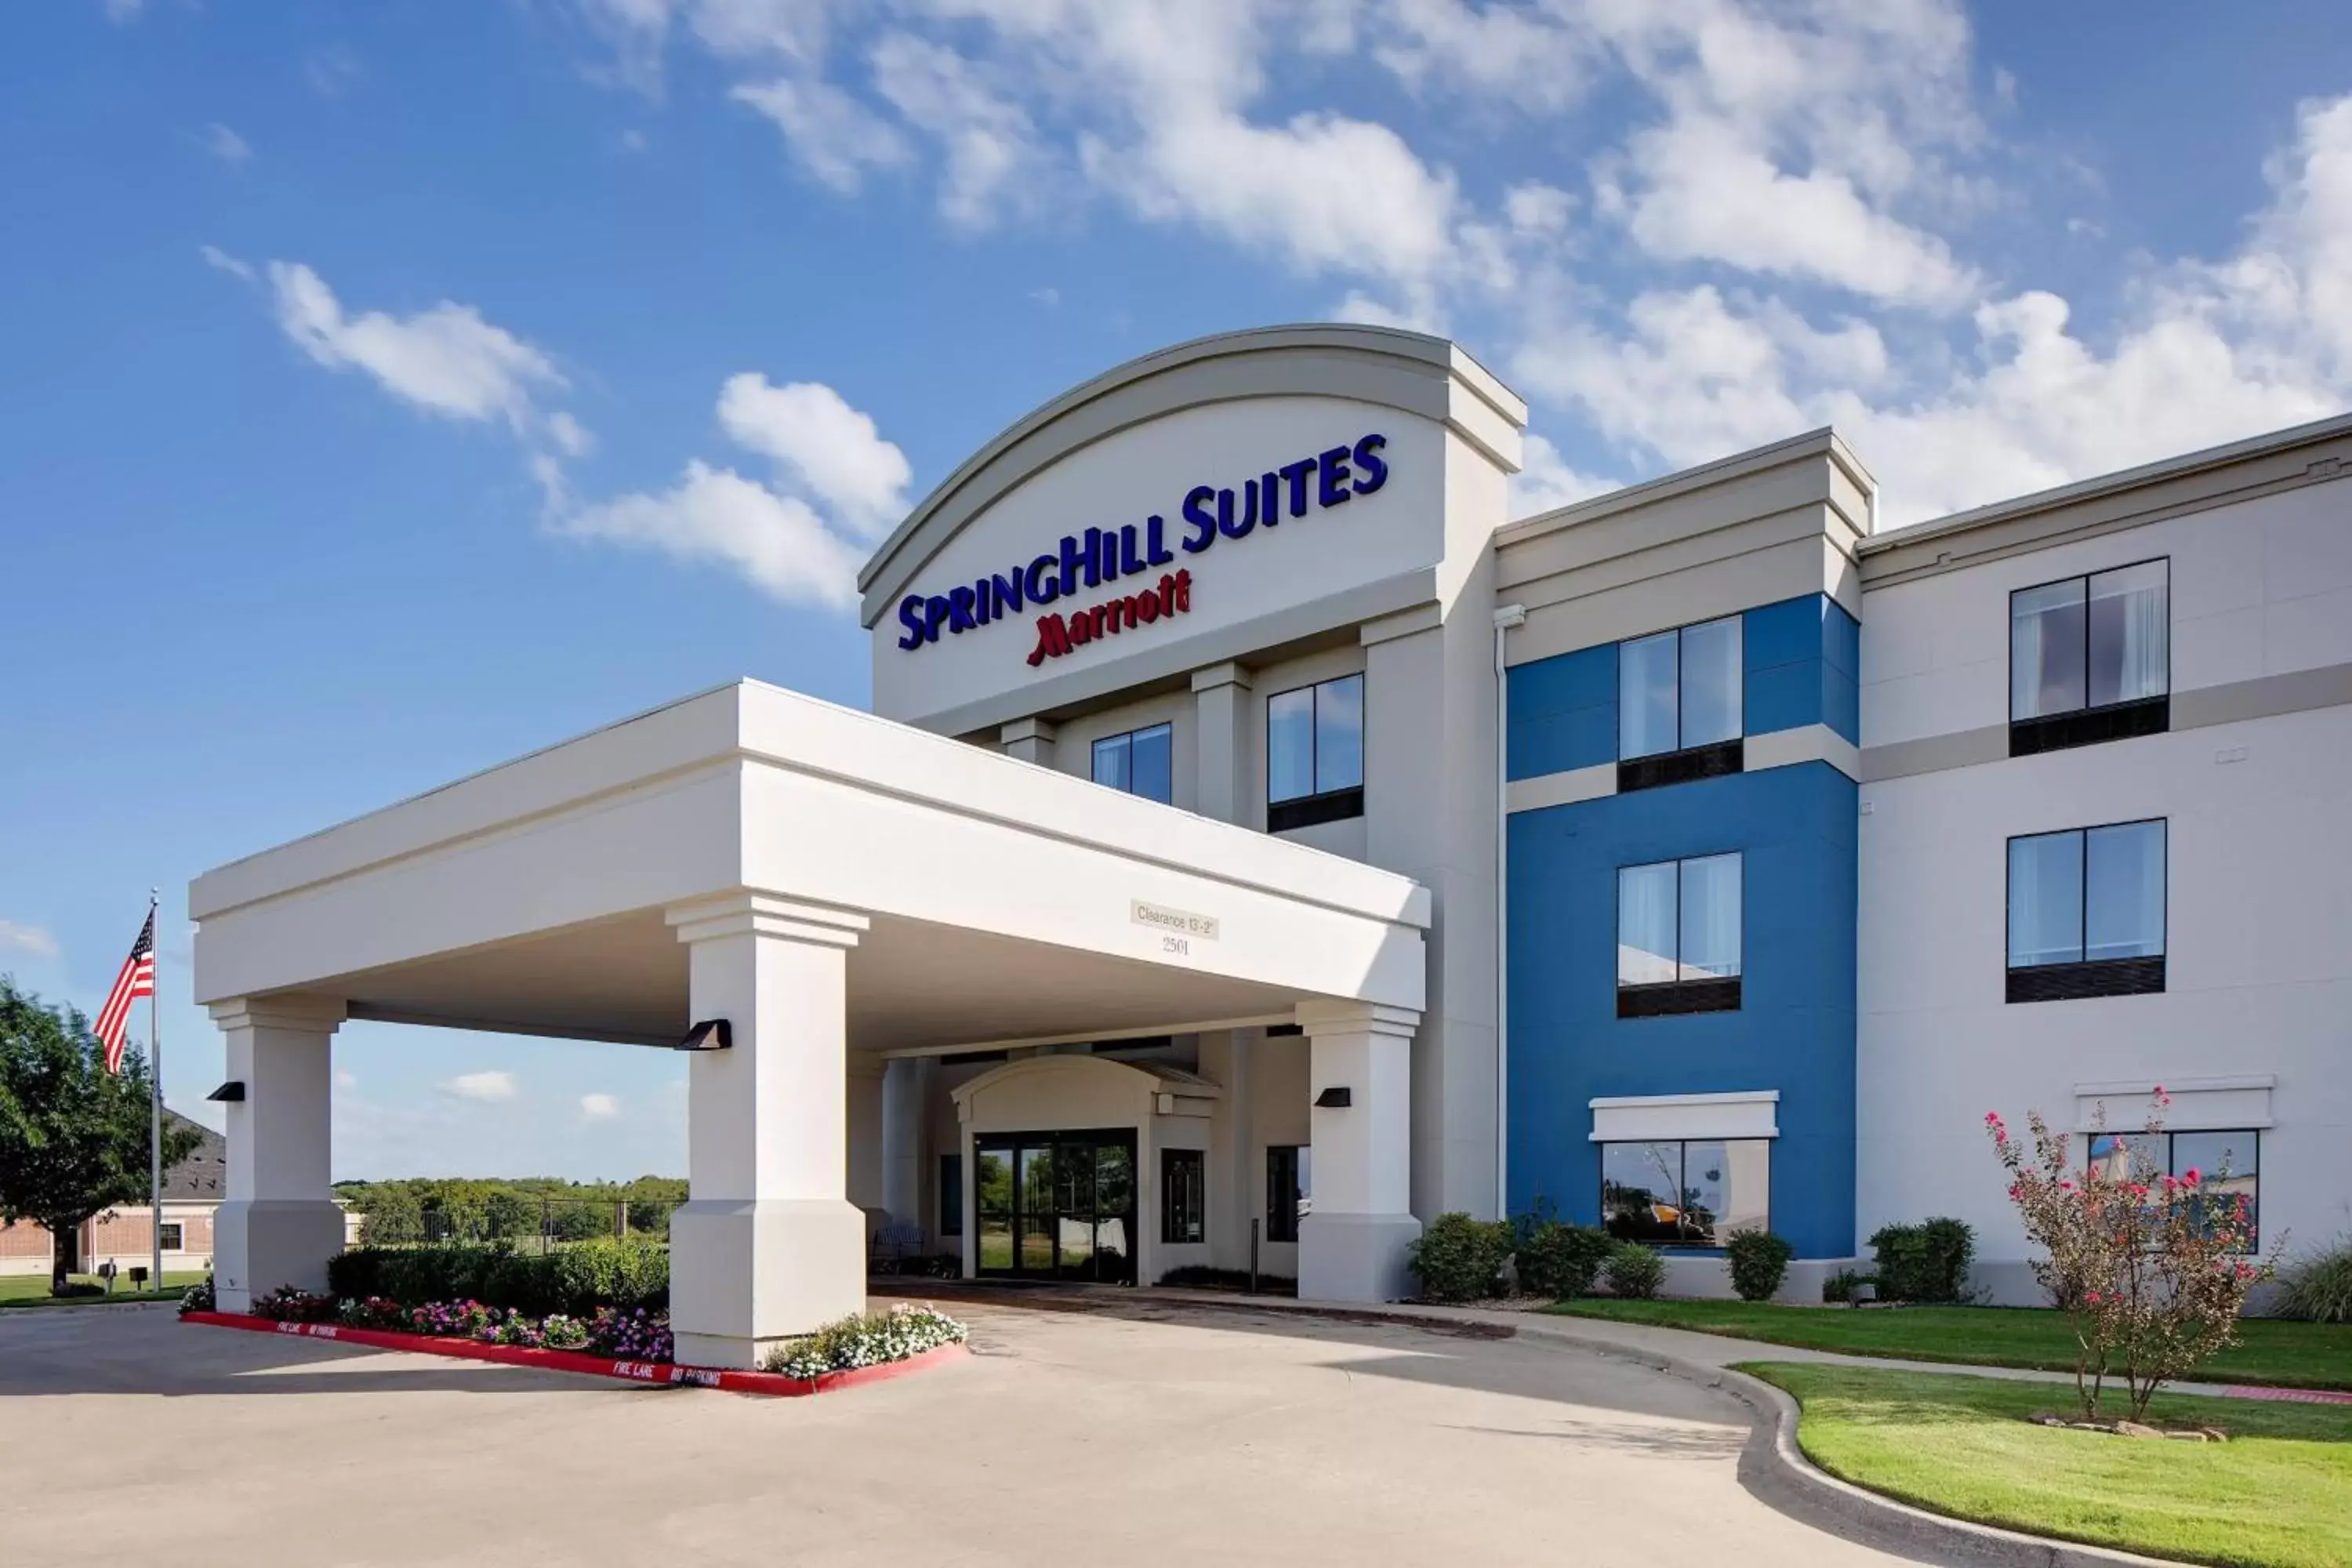 Property Building in SpringHill Suites by Marriott Ardmore